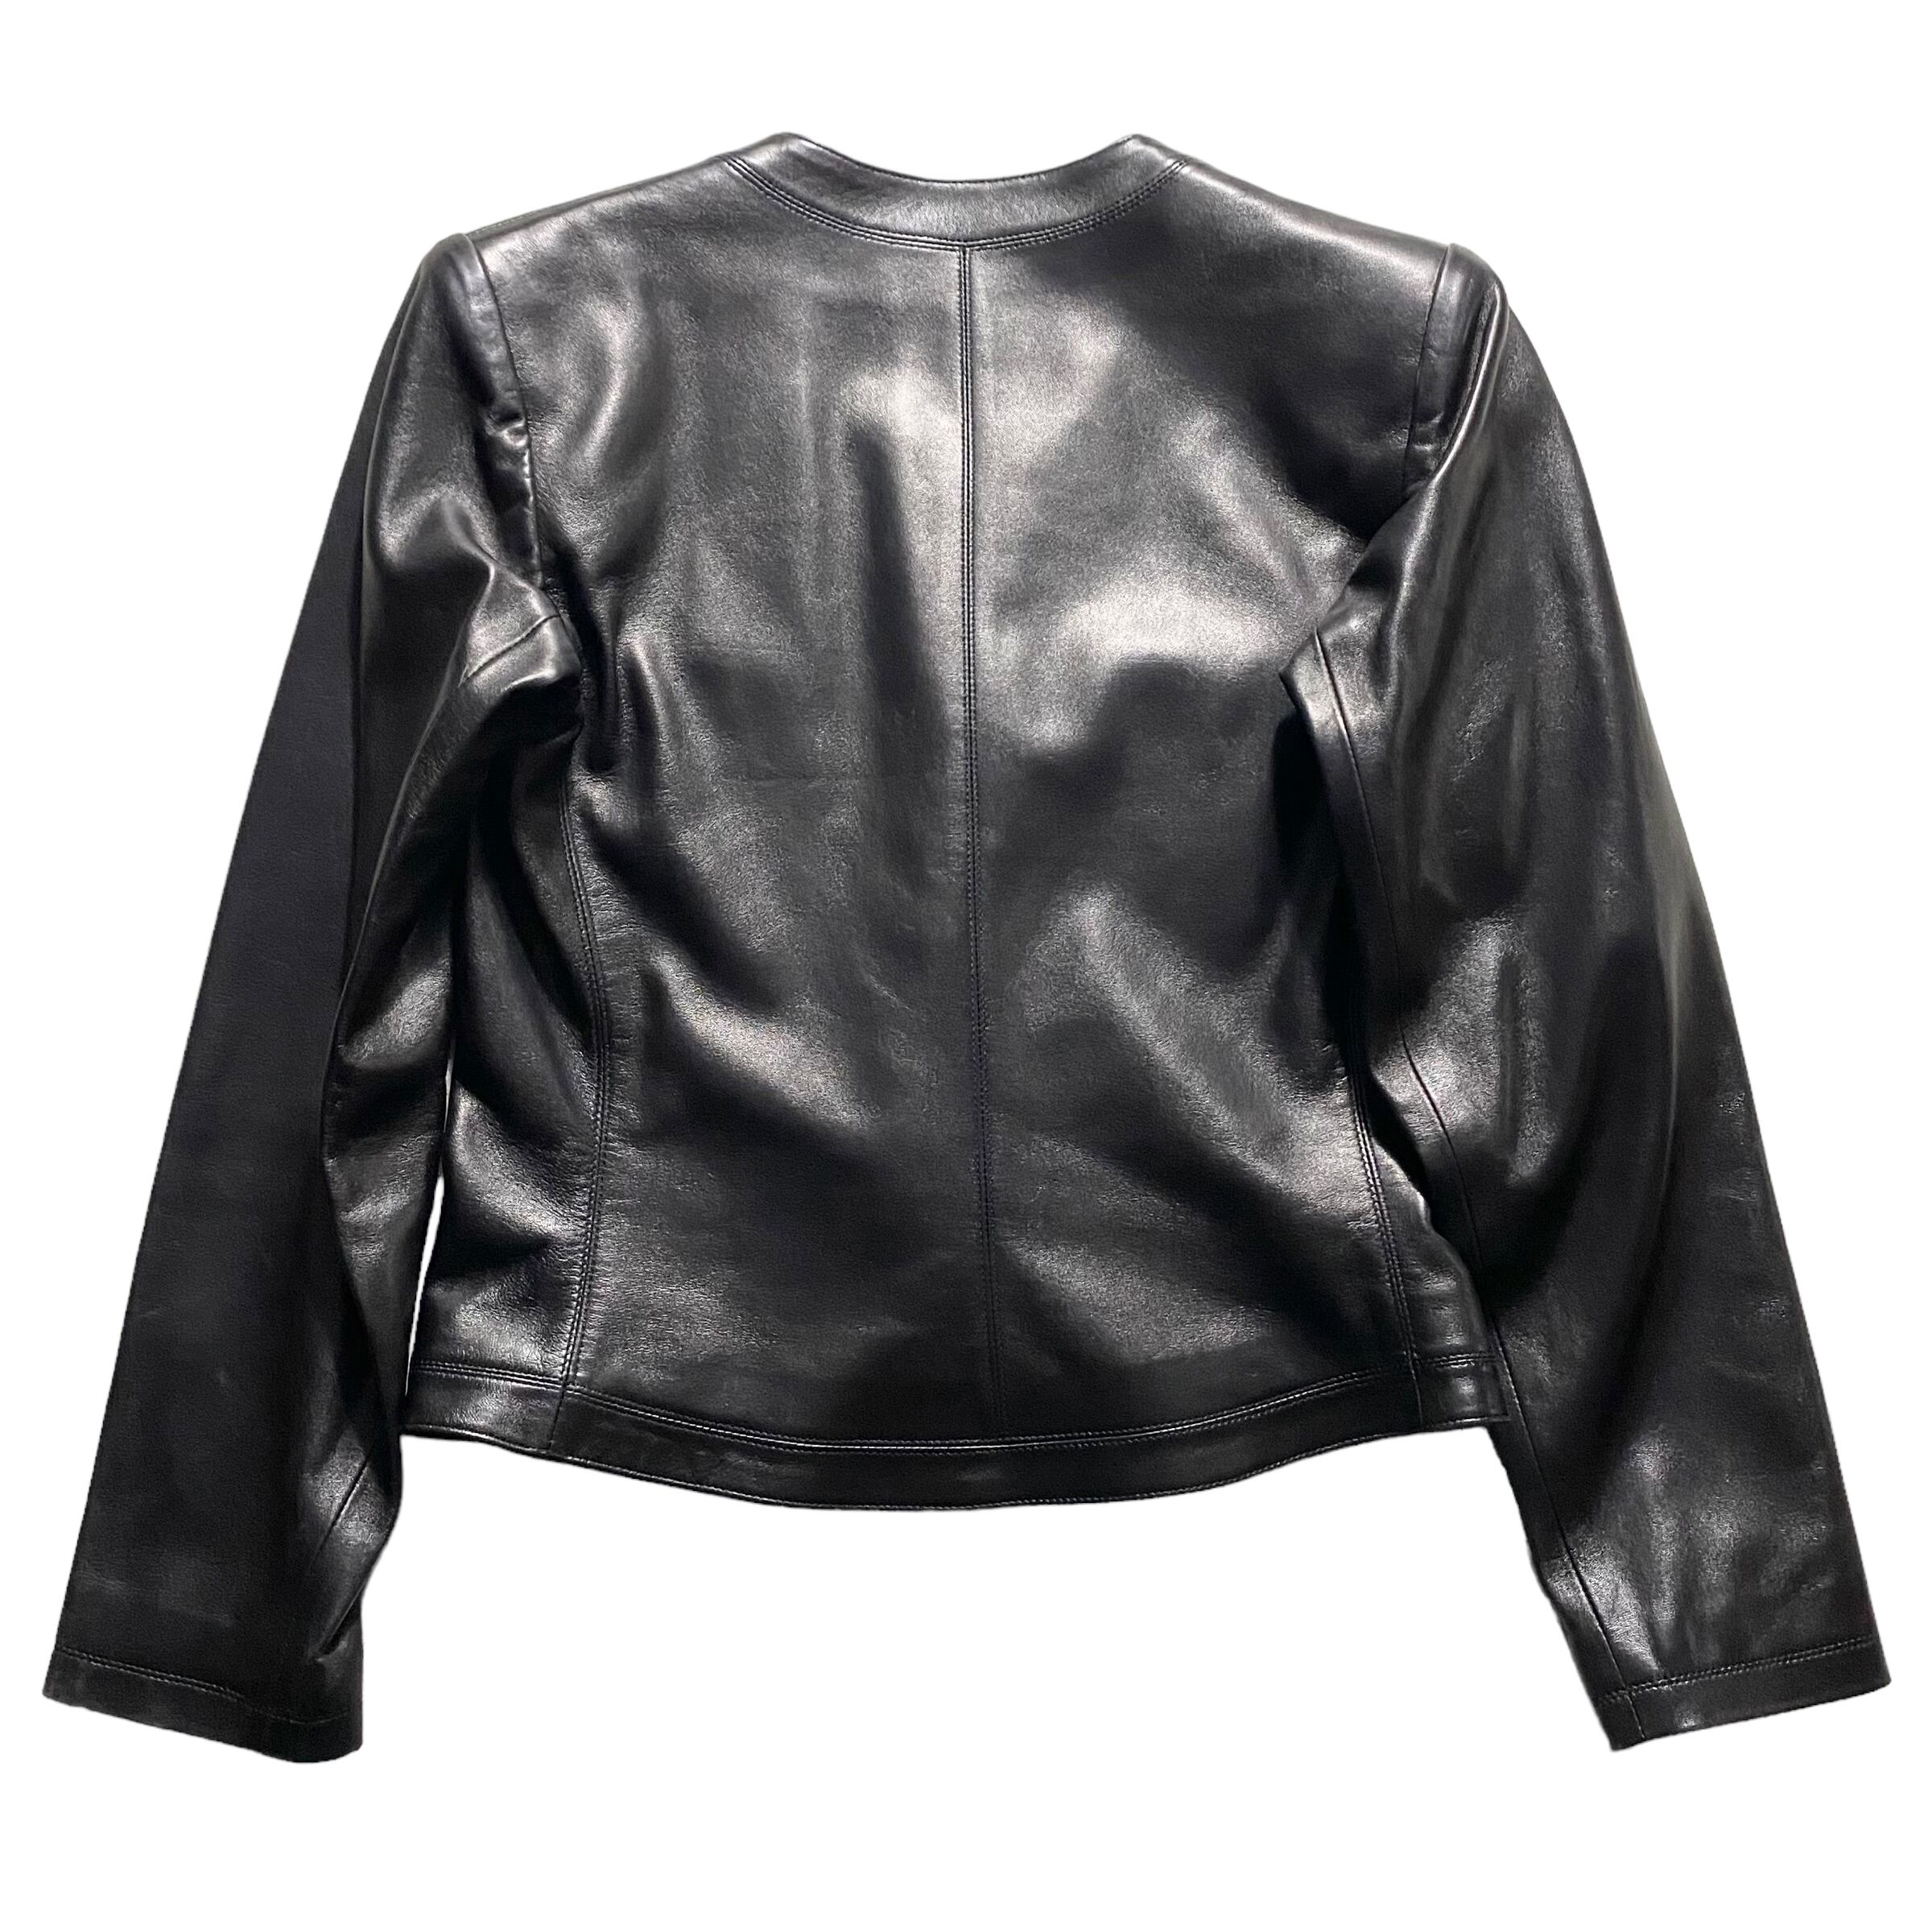 ＜EDITIONS M.R＞RIVE GAUCHE LEATHER JACKET